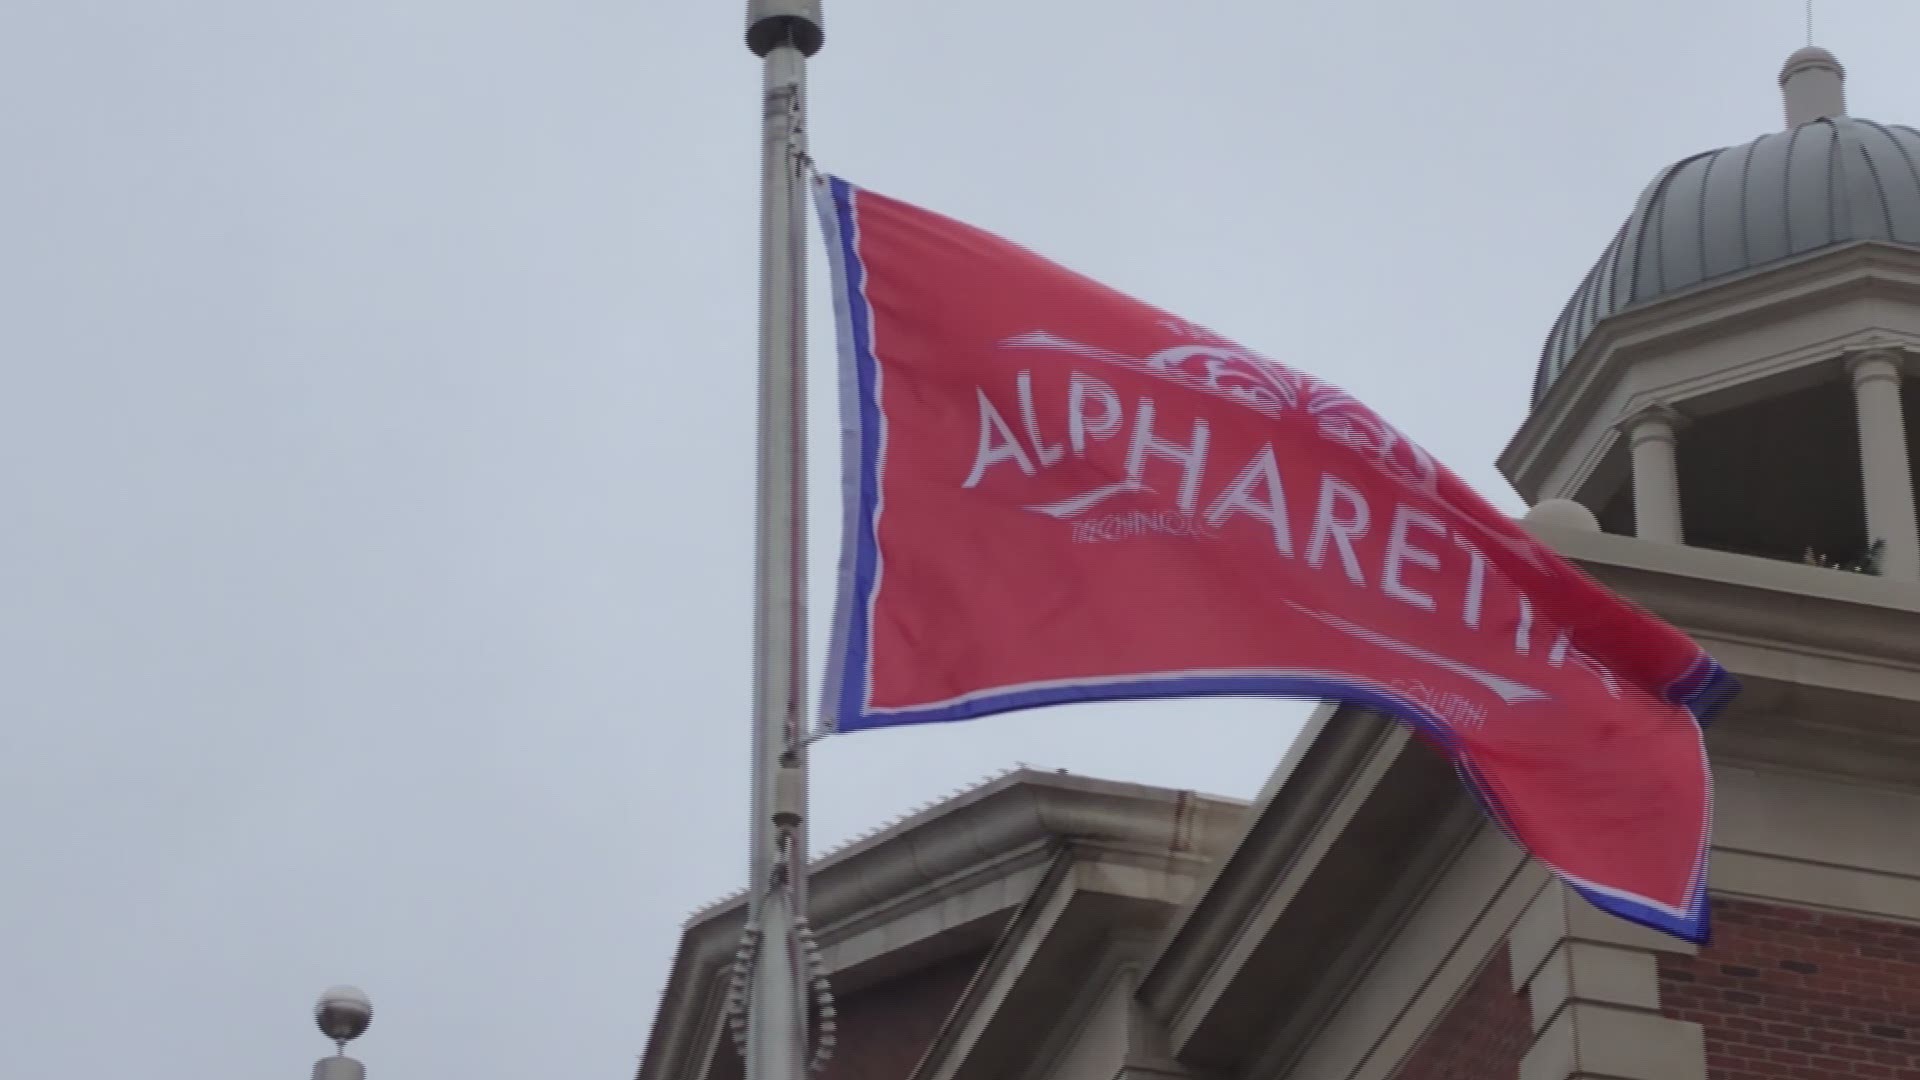 The city of Alpharetta will no longer fund the Old Soldiers Day Parade, after a suit was filed against the city for banning the confederate flag.